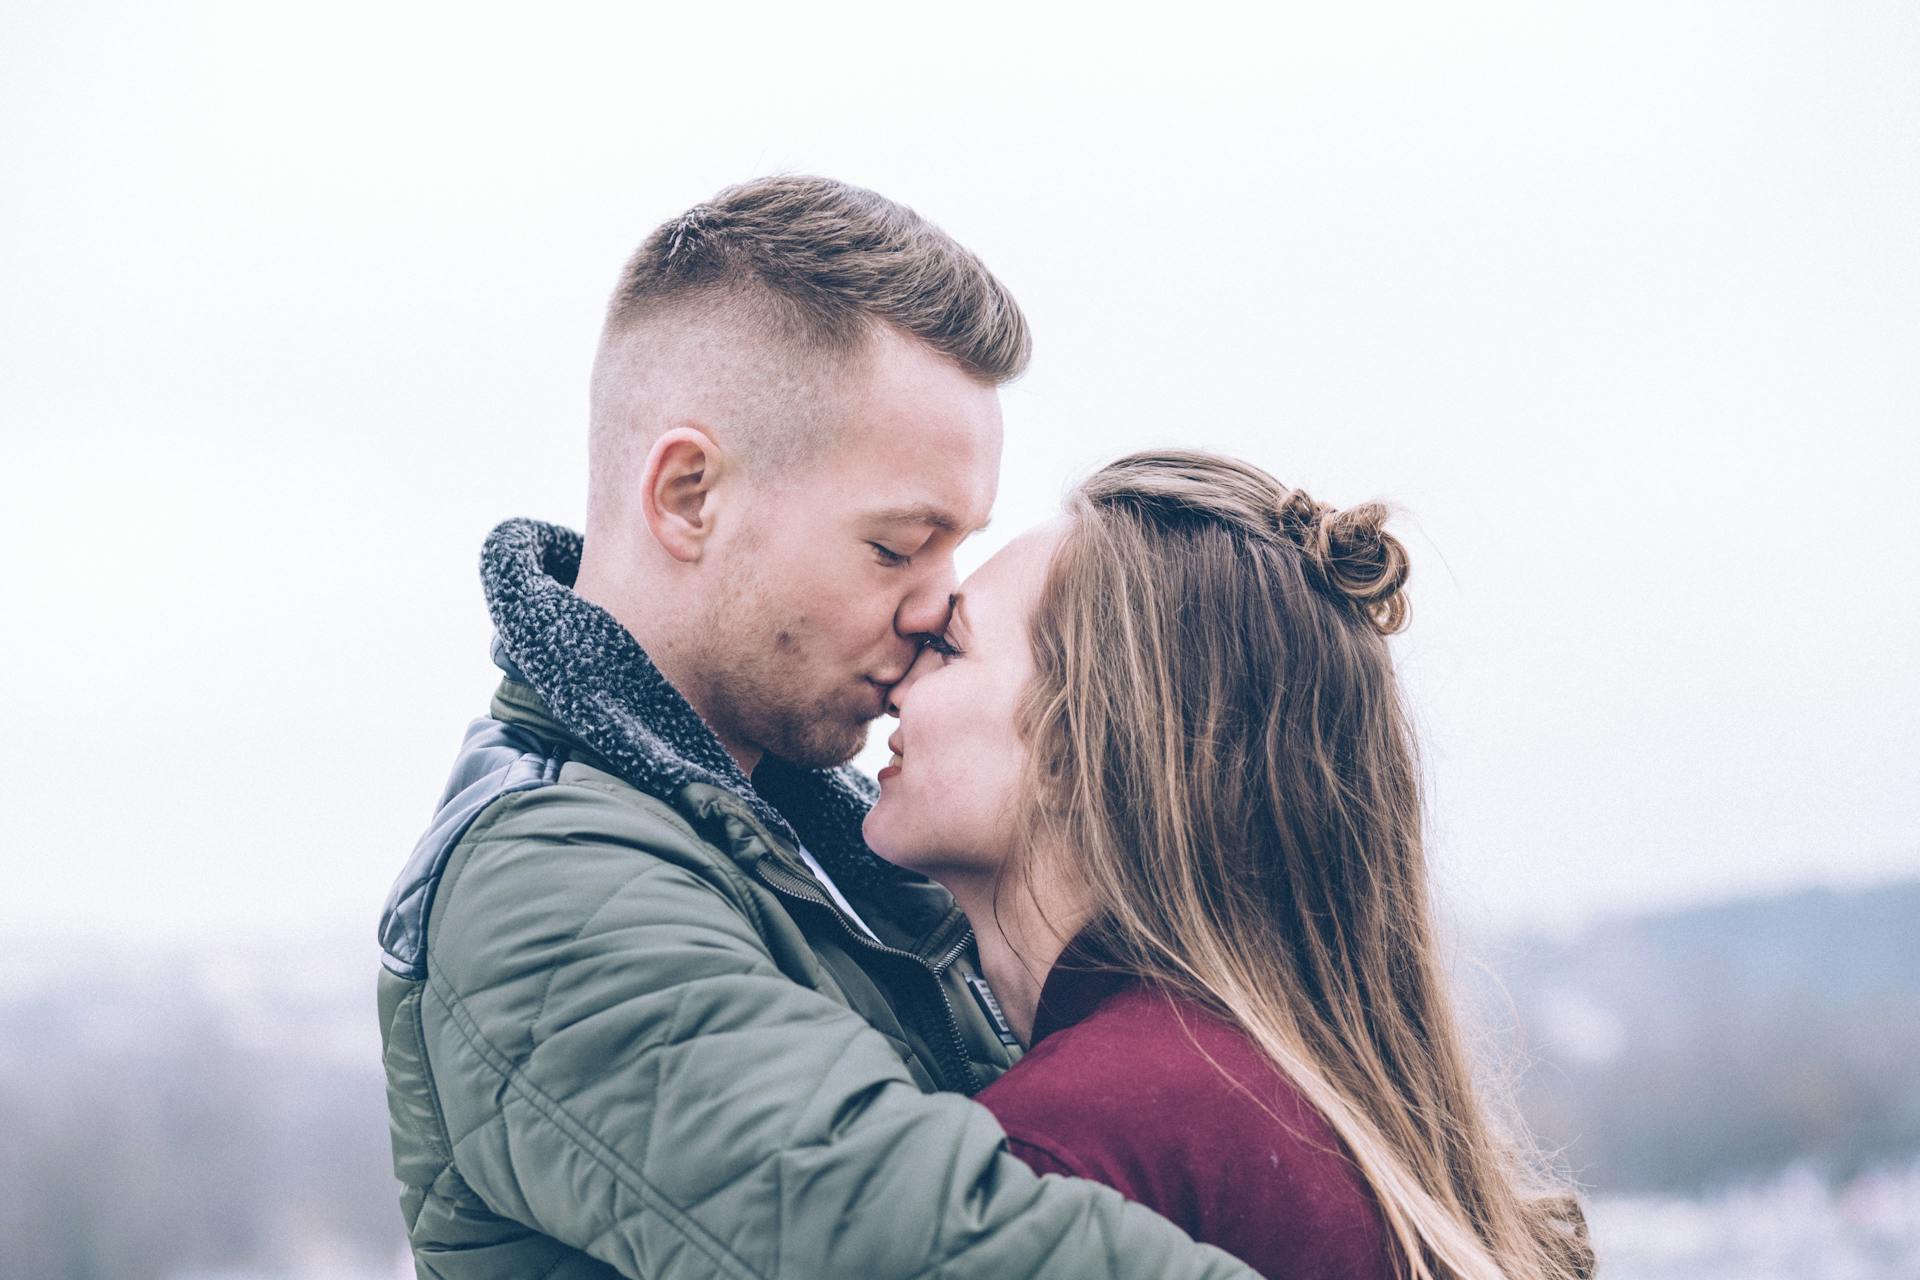 A man kissing his girlfriend on the nose | Source: Pexels